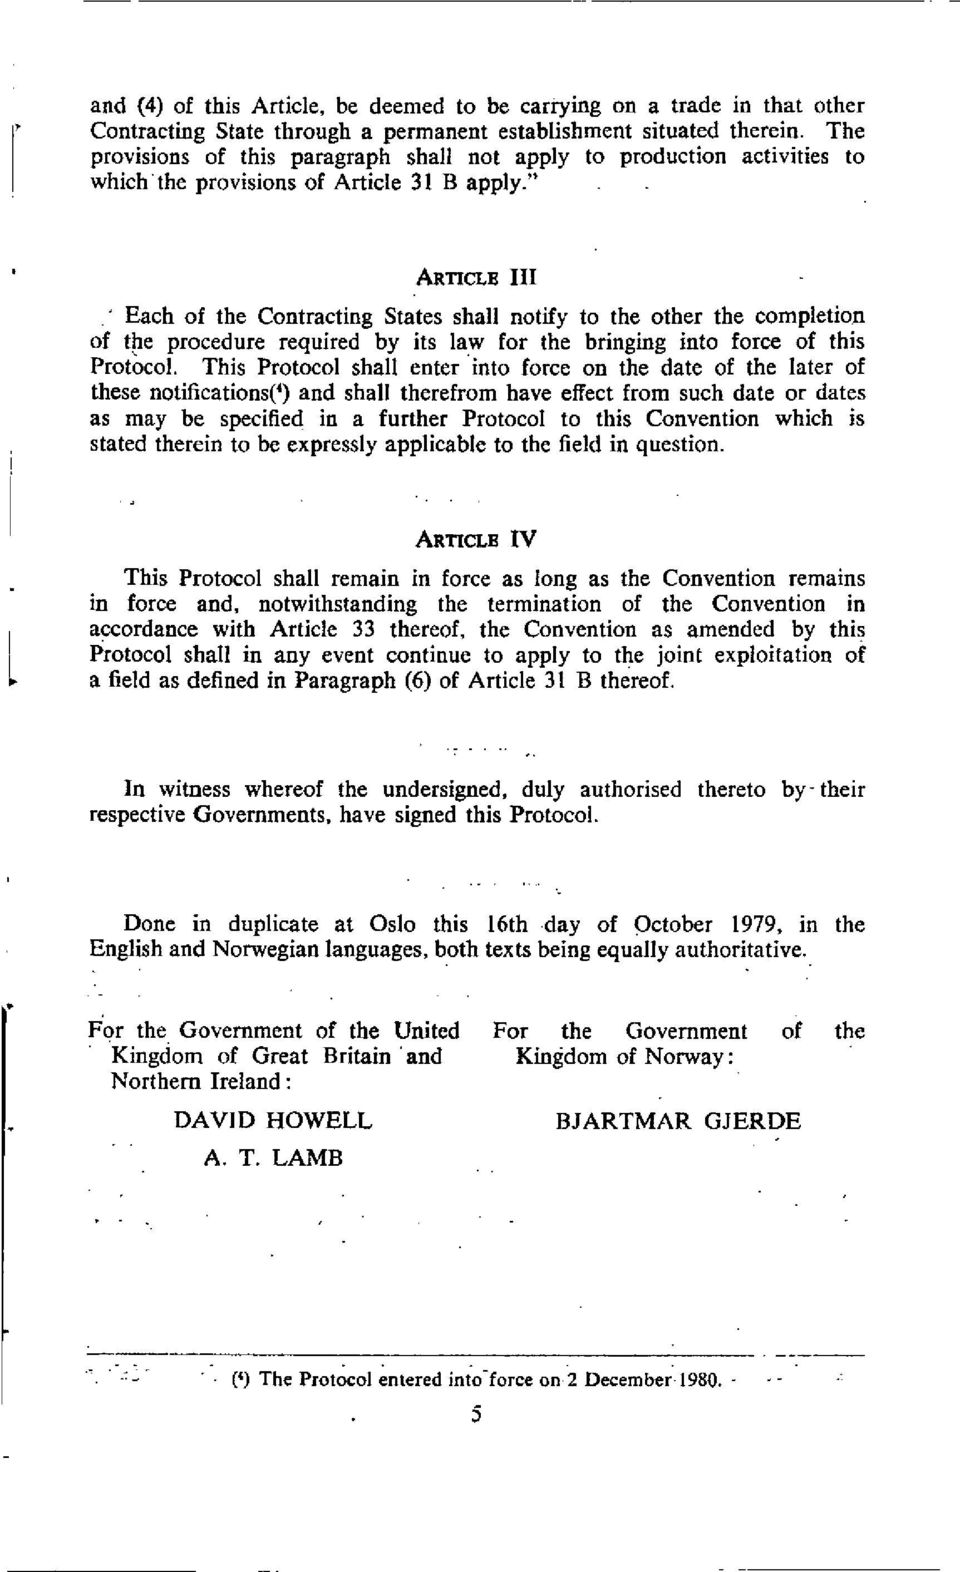 " ARTICLE III Each of the Contracting States shall notify to the other the completion of the procedure required by its law for the bringing into force of this Protocol.